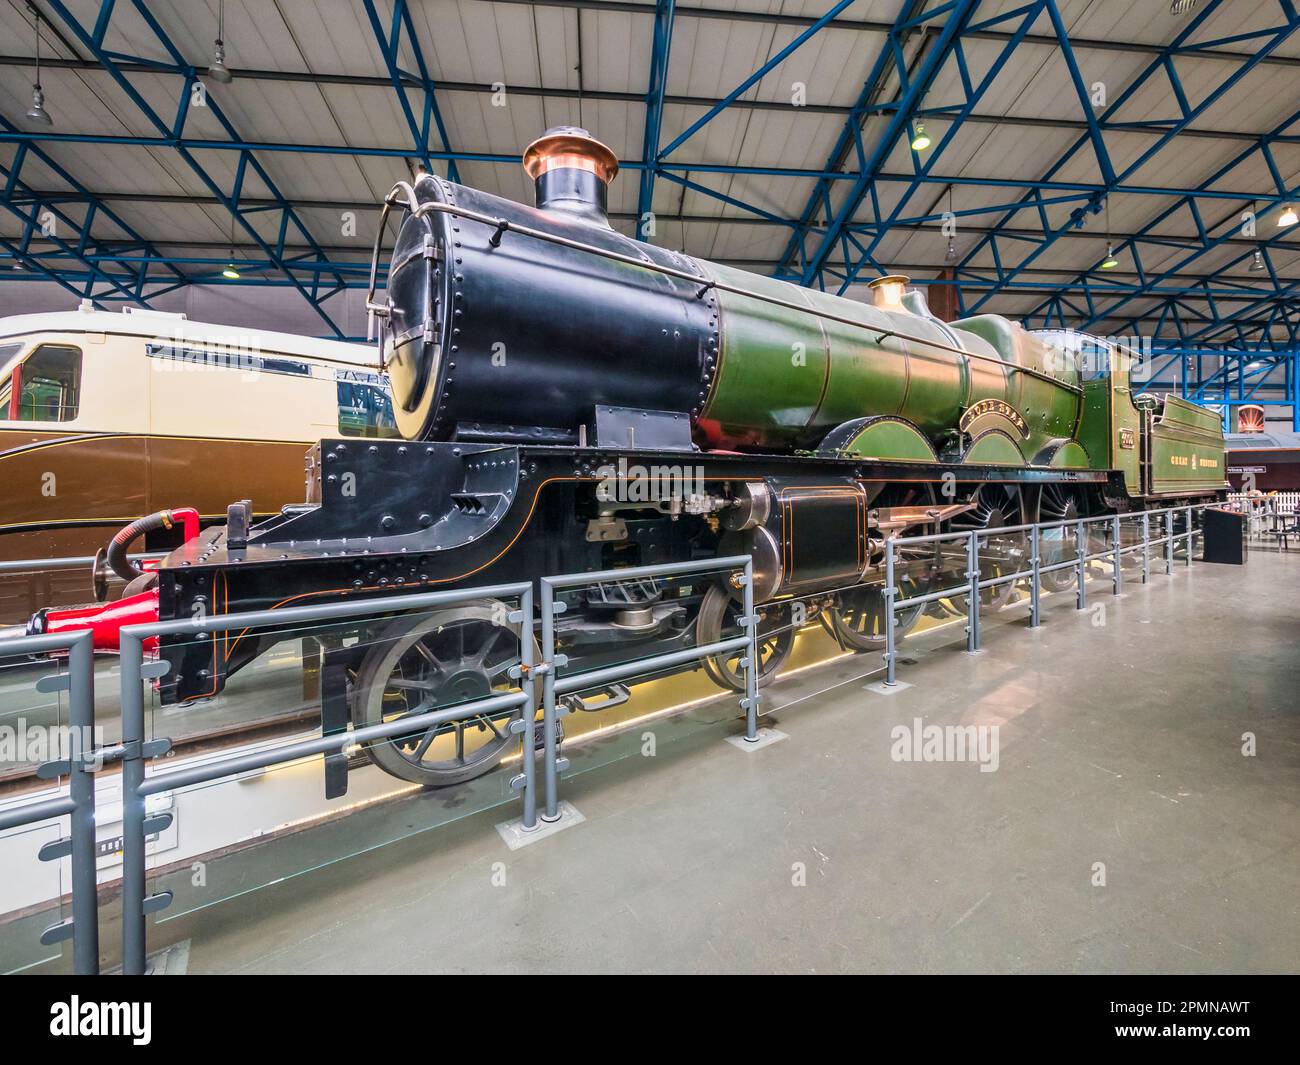 General image inside the National Railway Museum in York seen here featuring the Great Western Railways Lode Star locomotive Stock Photo